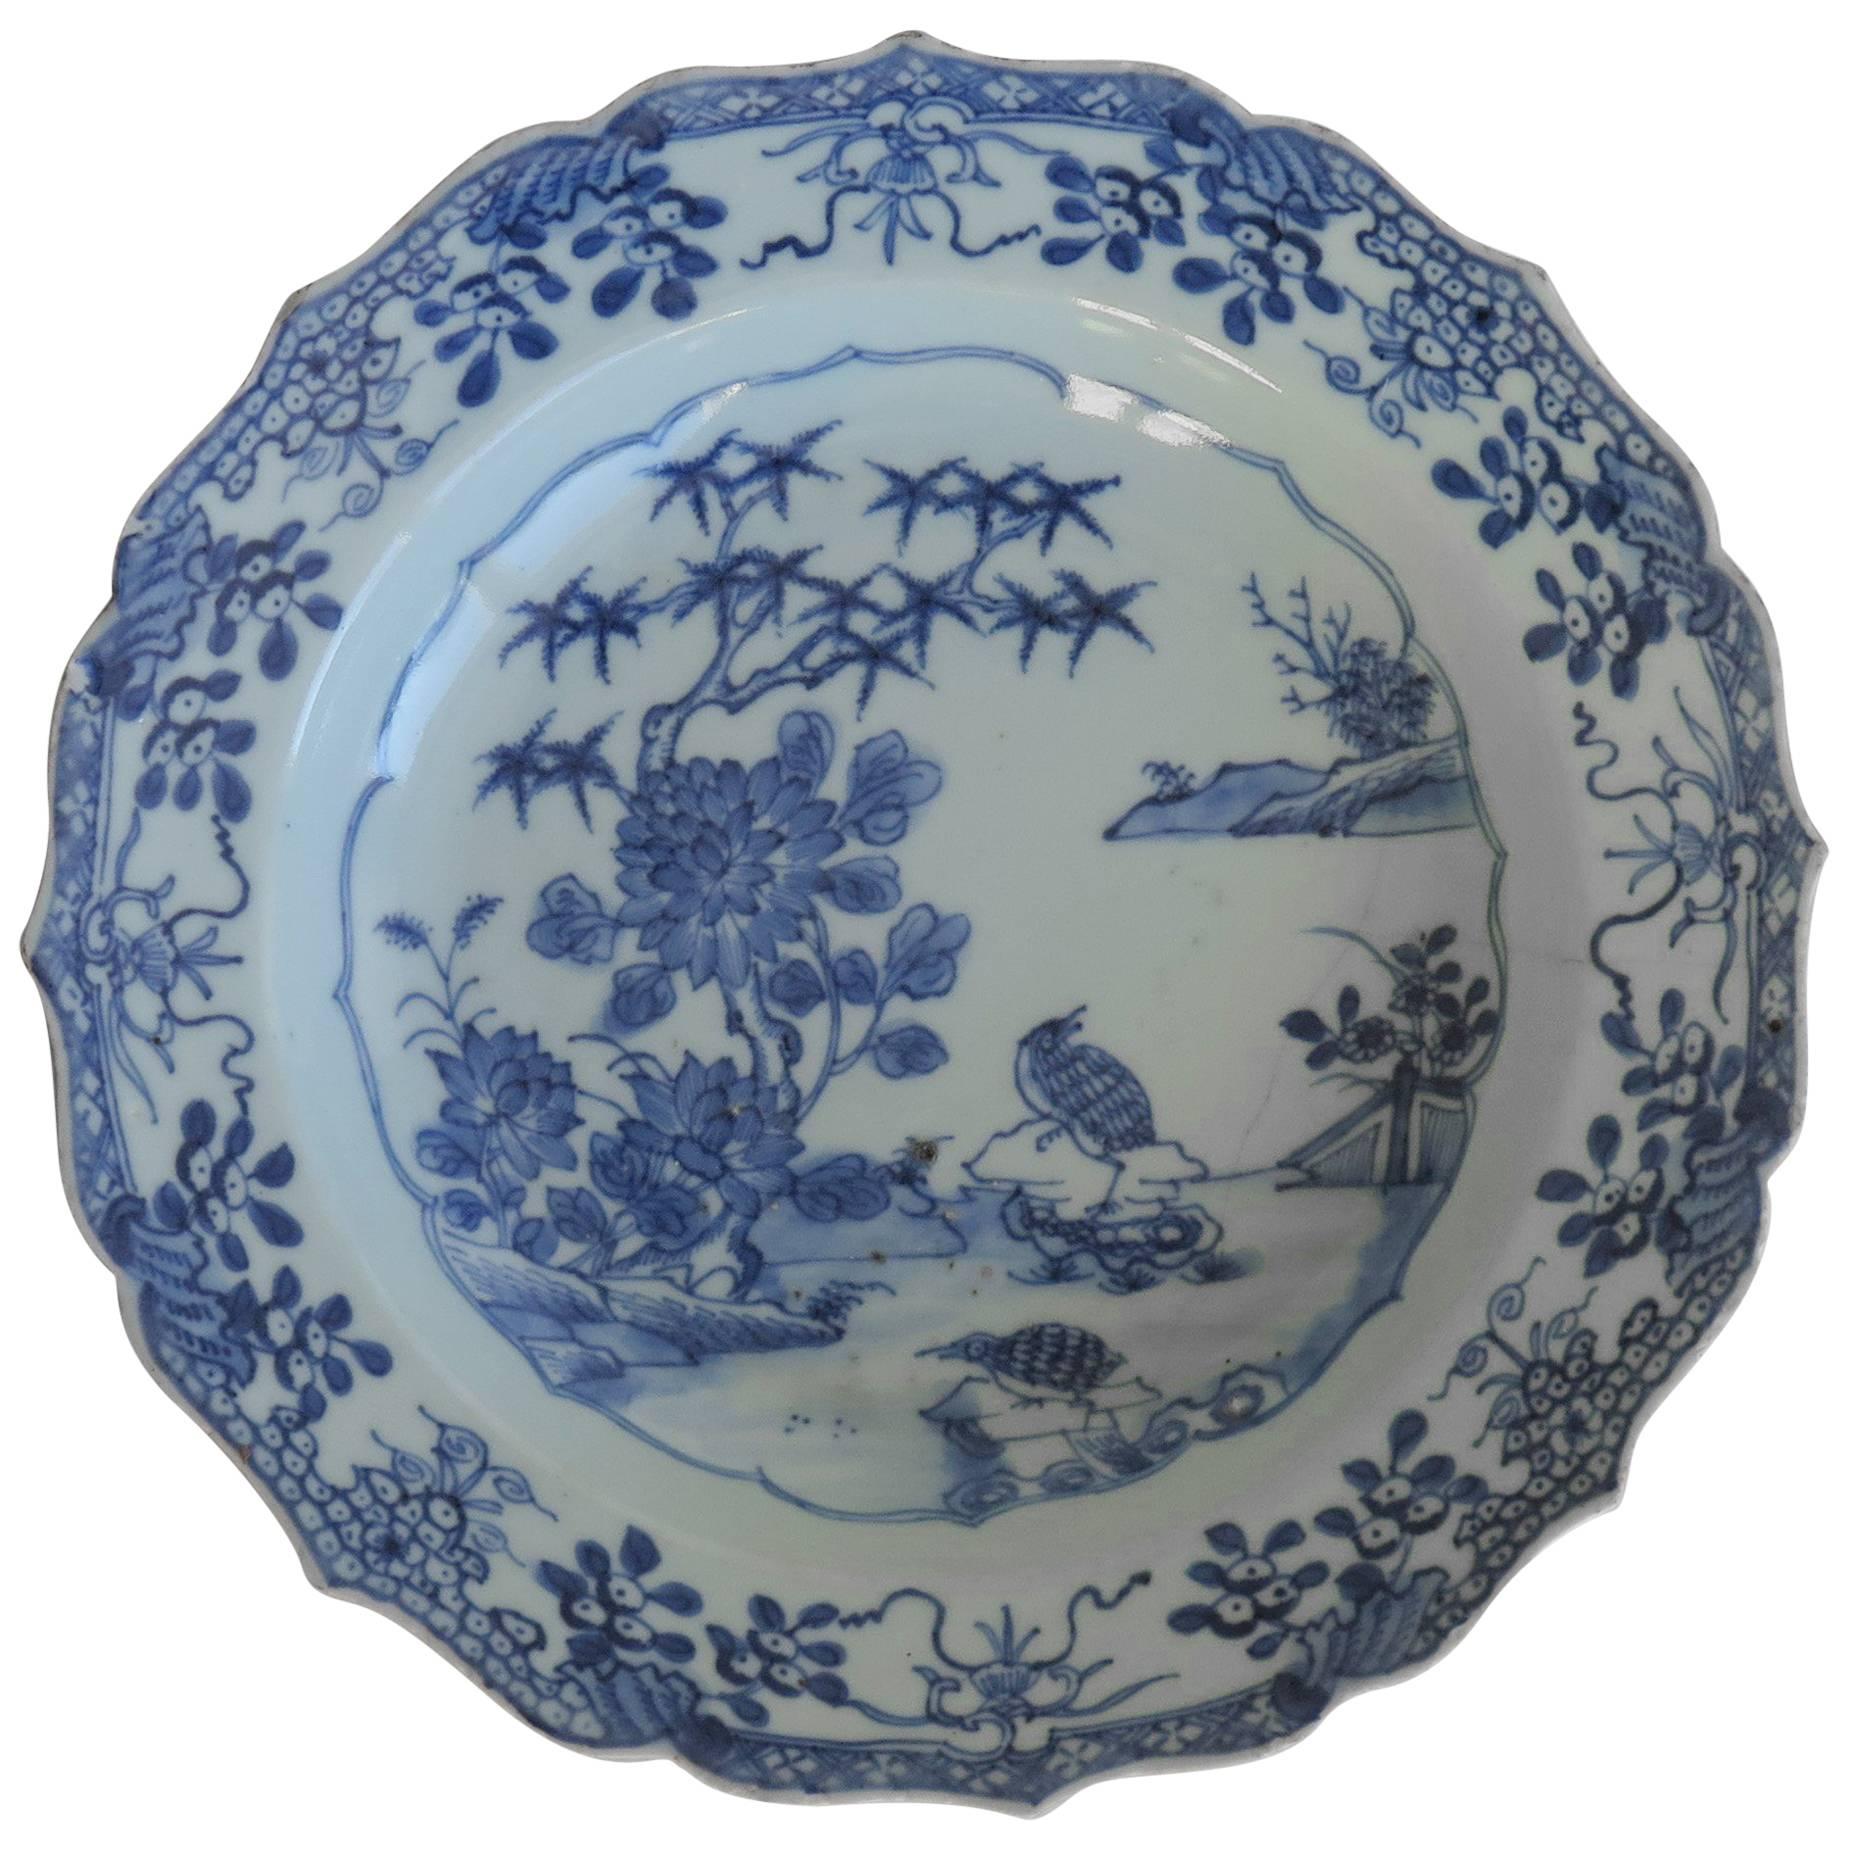 Chinese Porcelain Plate or Bowl, Blue and White, Woodland Birds, circa 1770